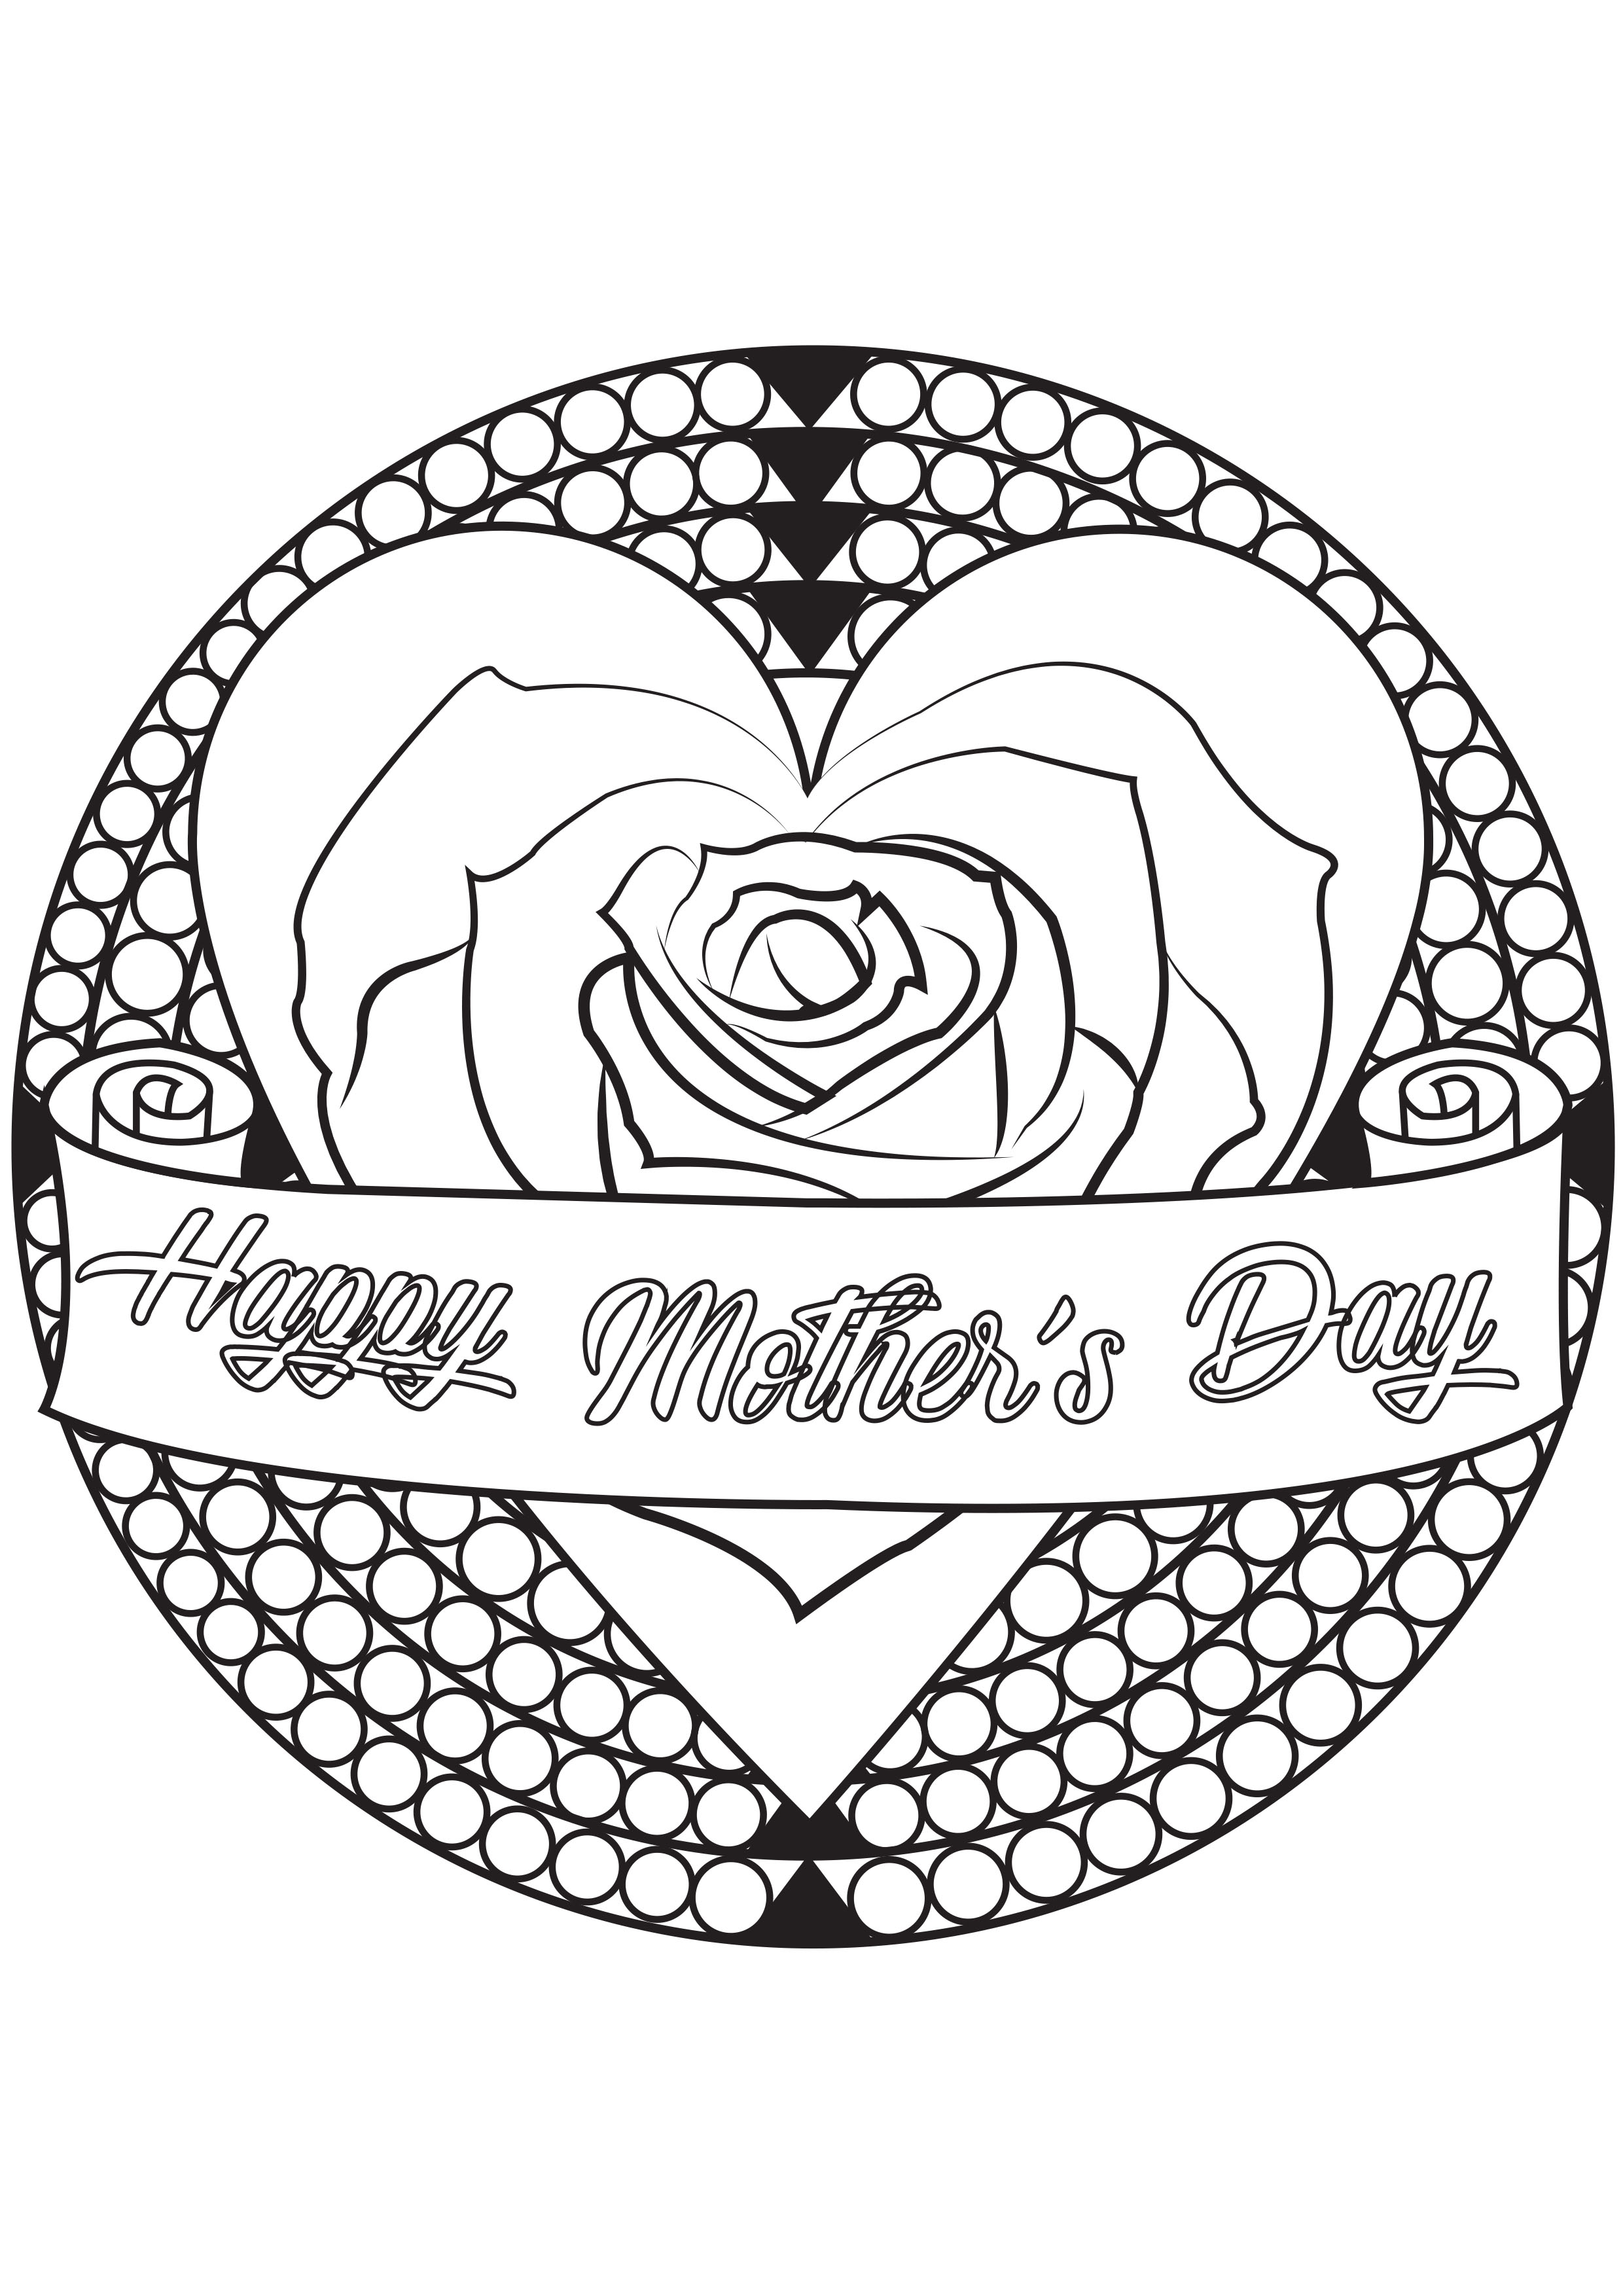 HIDDEN - Celebrations (Happy mother's day, birthday...) coloring pages